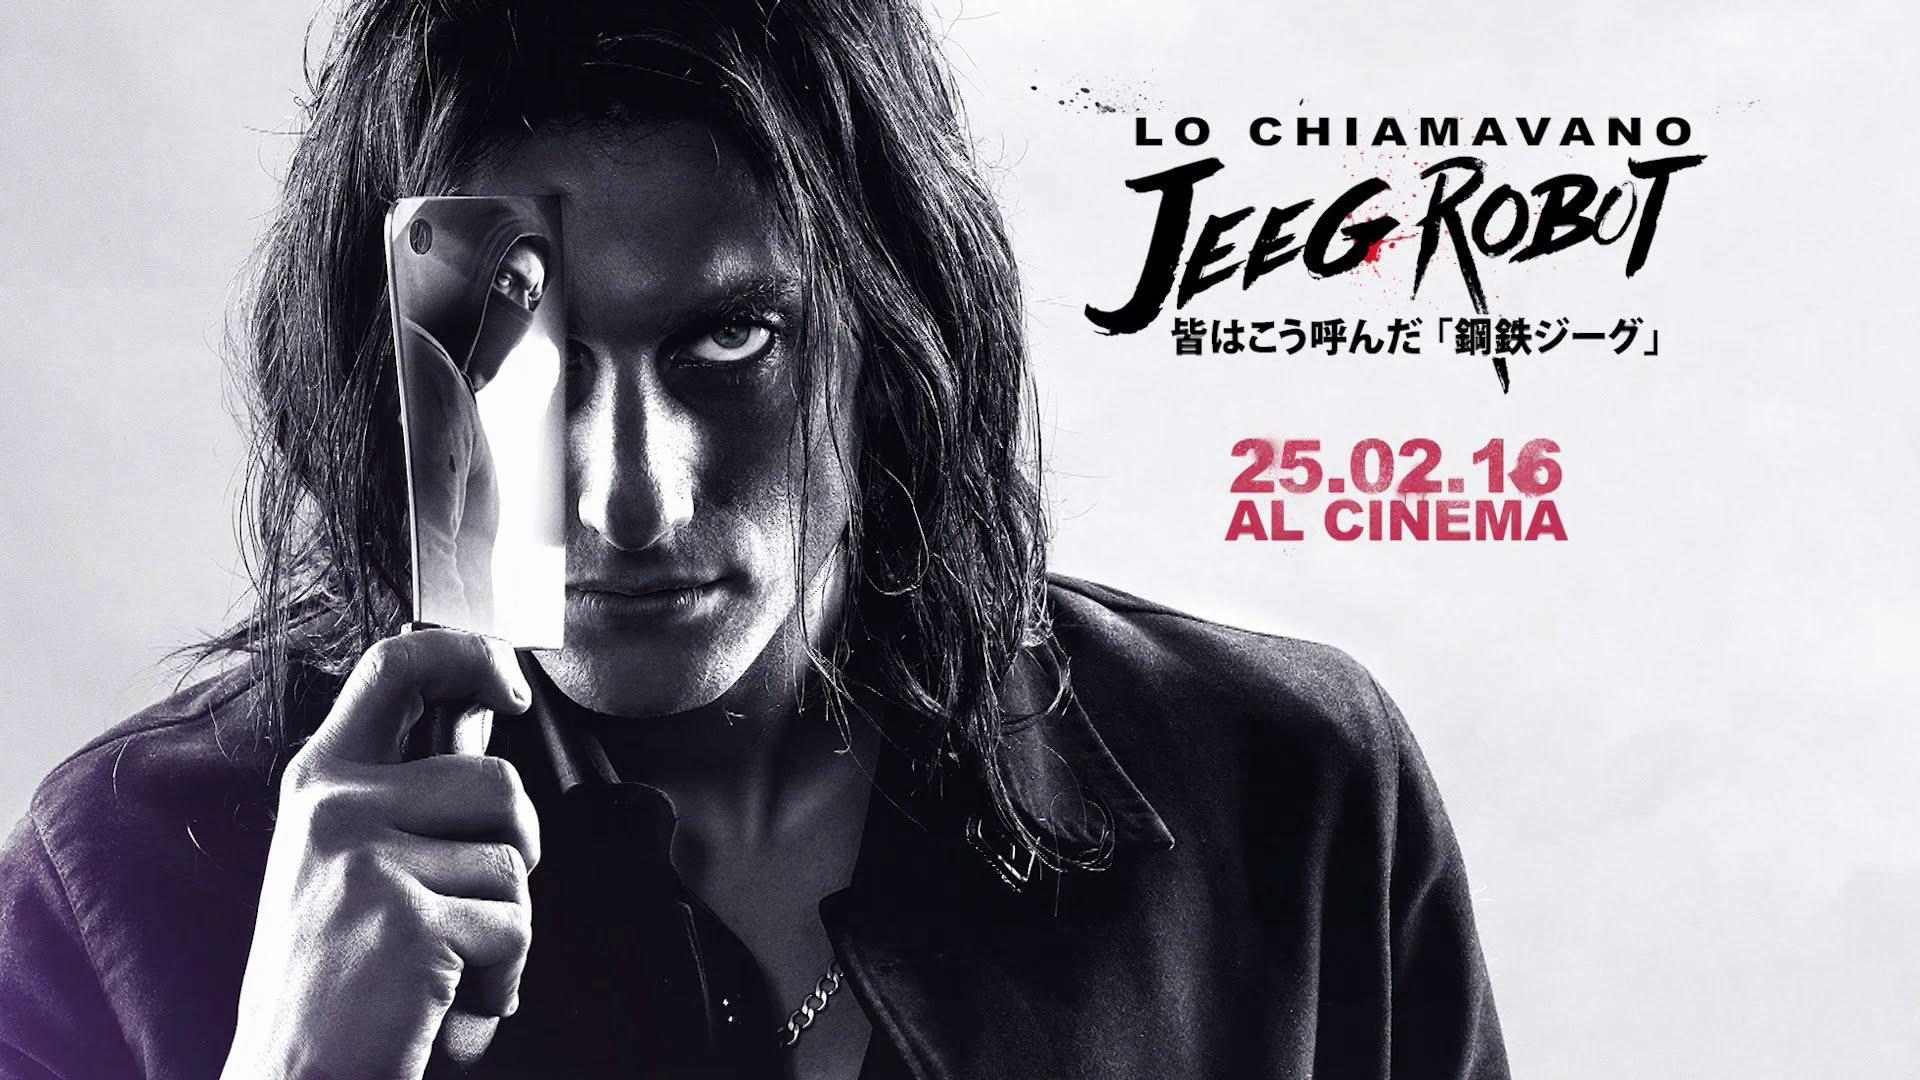 Image gallery for "Lo Jeeg Robot (2015)" - Filmaffinity